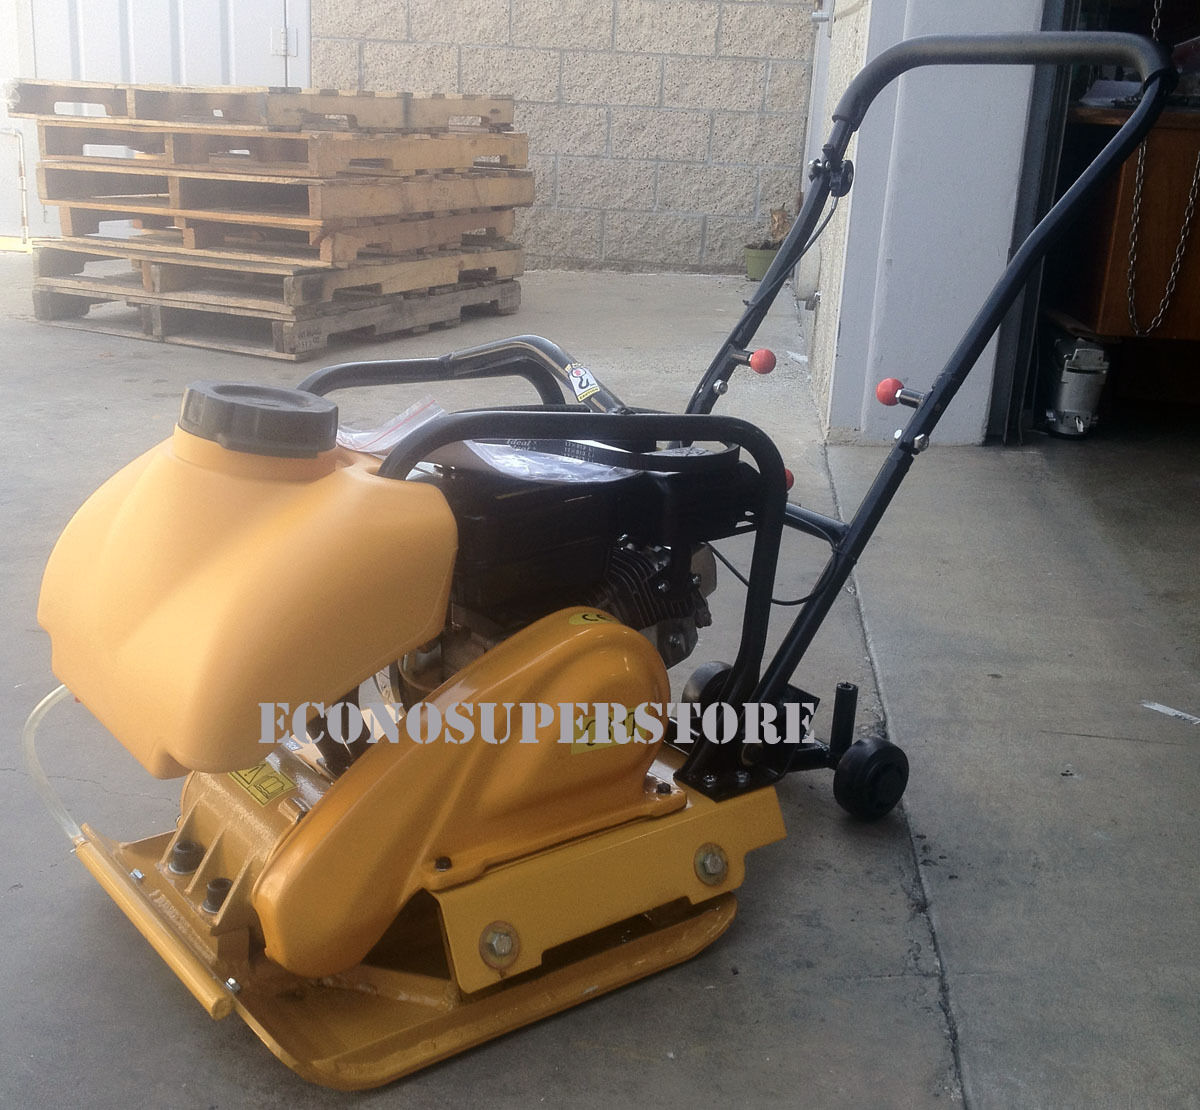 6.5HP GAS VIBRATION PLATE COMPACTOR WALK BEHIND TAMPER RAMMER W/WATER TANK CARB